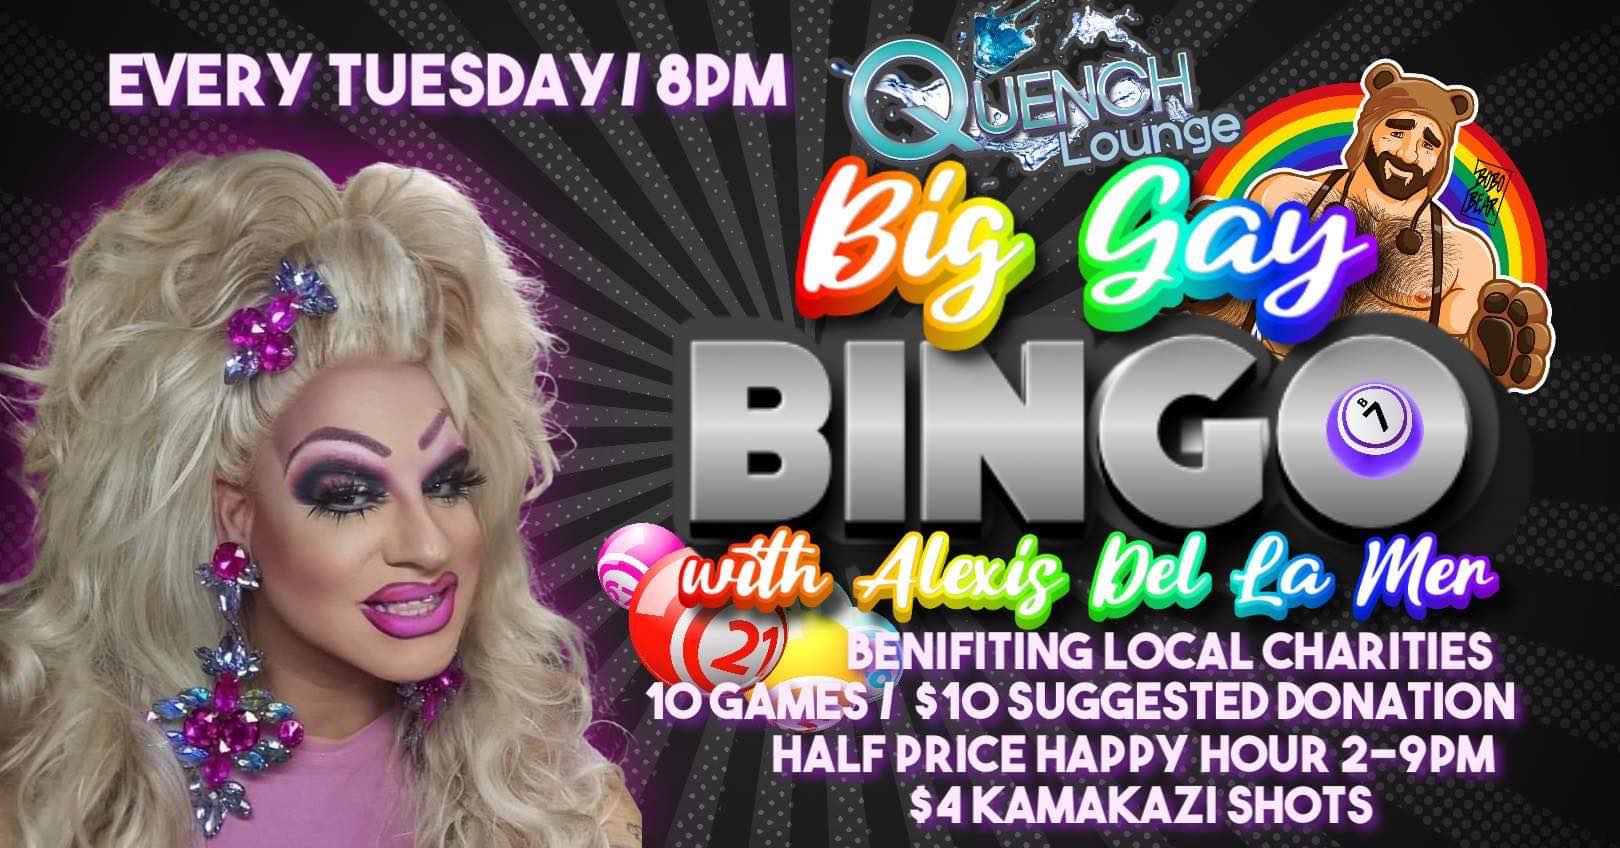 Drag Queen Bingo every Tuesday at 8:00pm